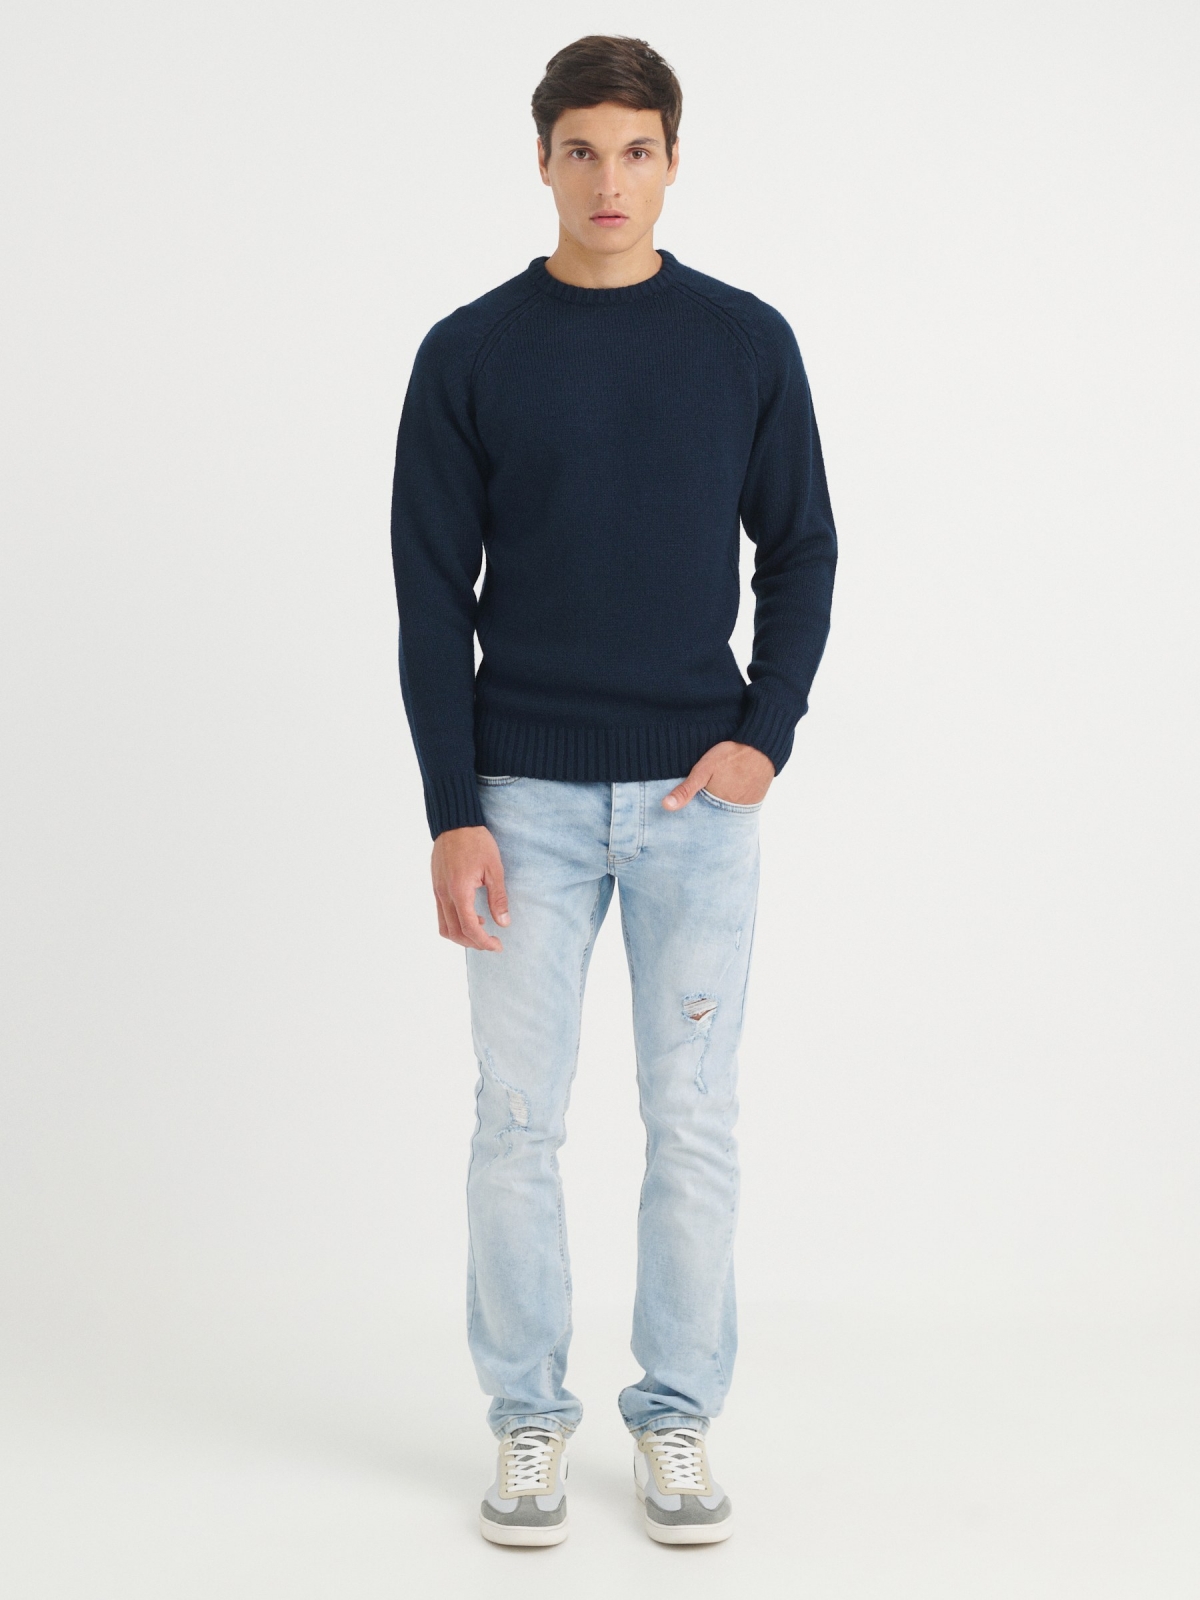 Basic knitted sweater navy front view